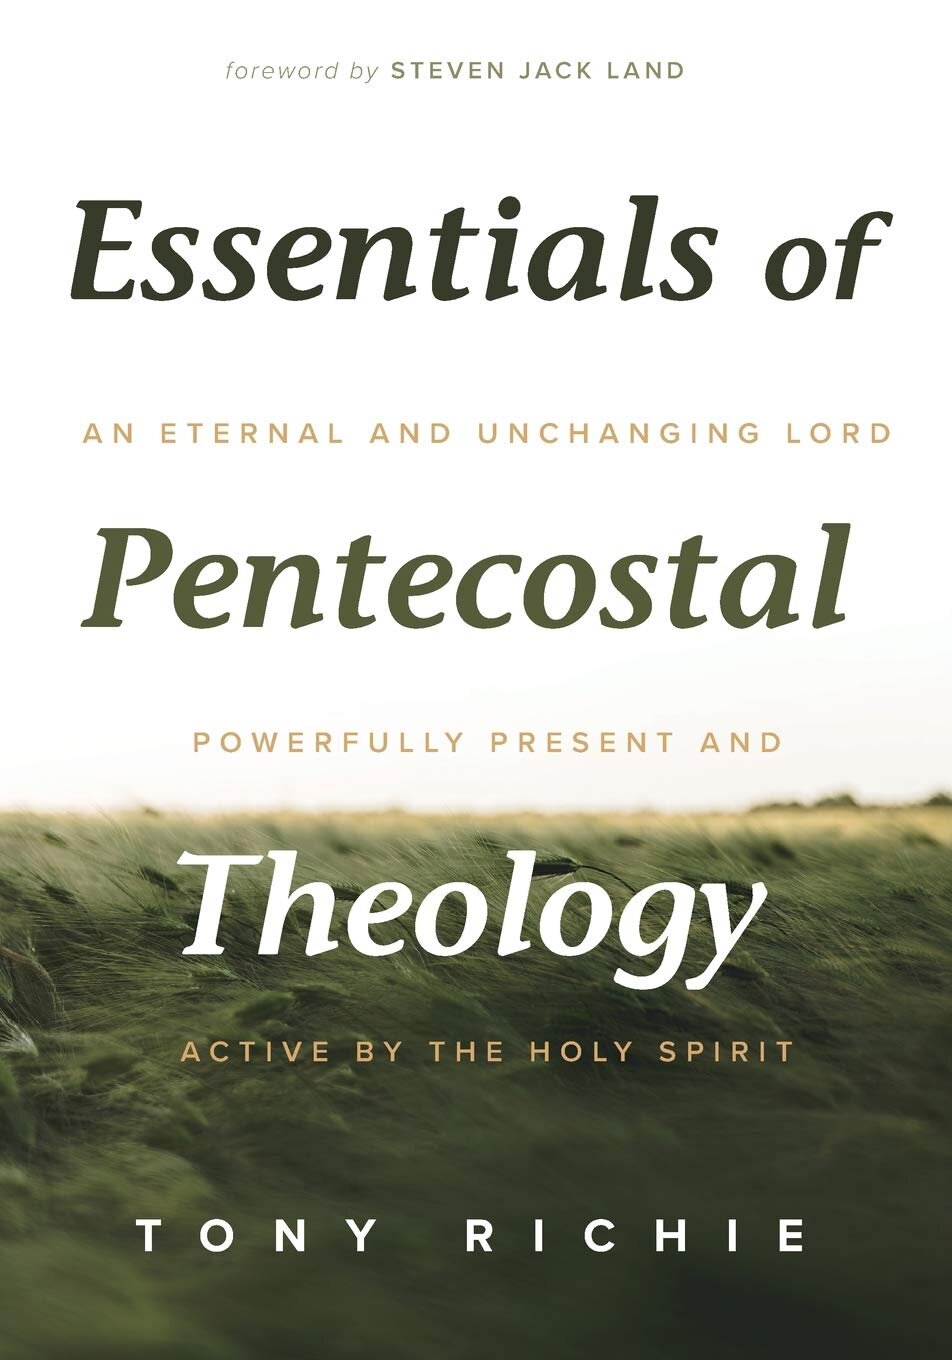 Essentials of Pentecostal Theology: An Eternal and Unchanging Lord Powerfully Present and Active by the Holy Spirit